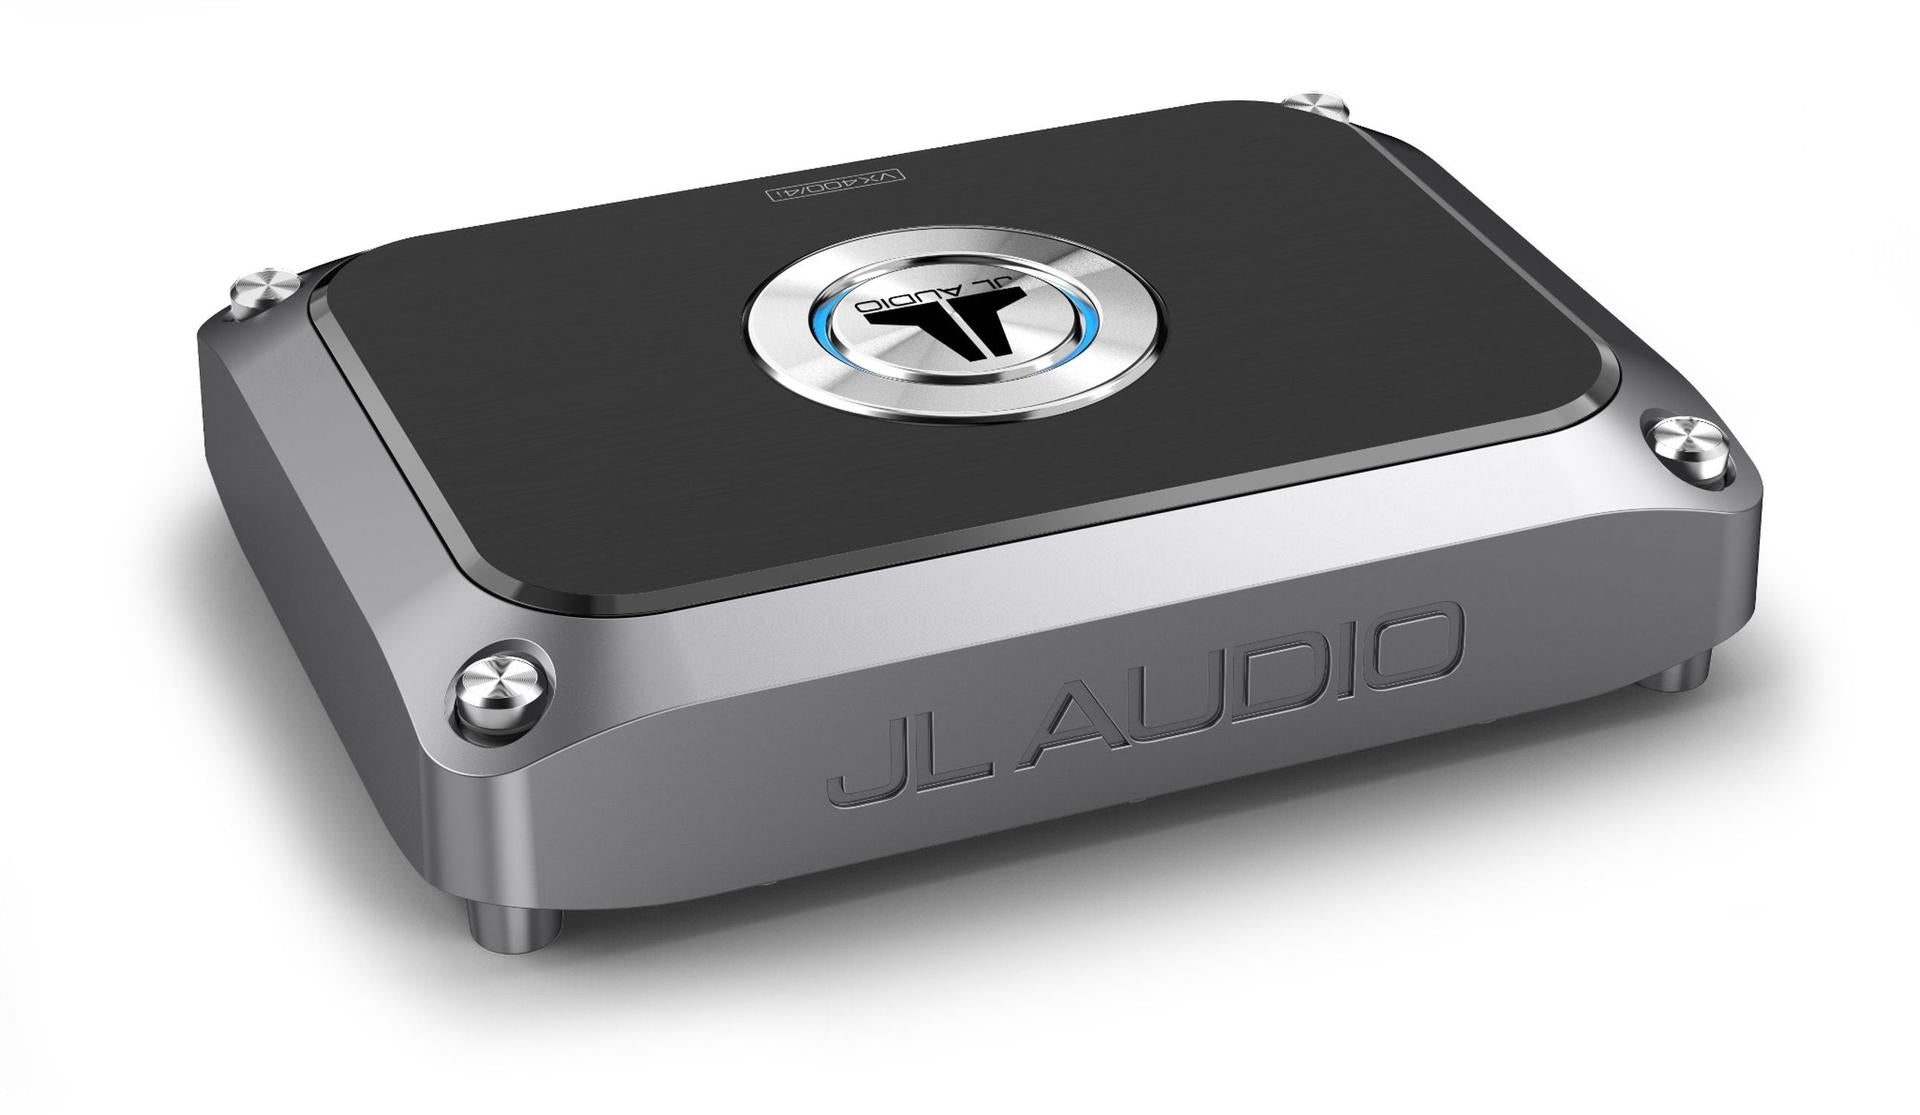 JL Audio VX400/4i 4-channel car amplifier with digital signal processing  75 watts RMS x 4